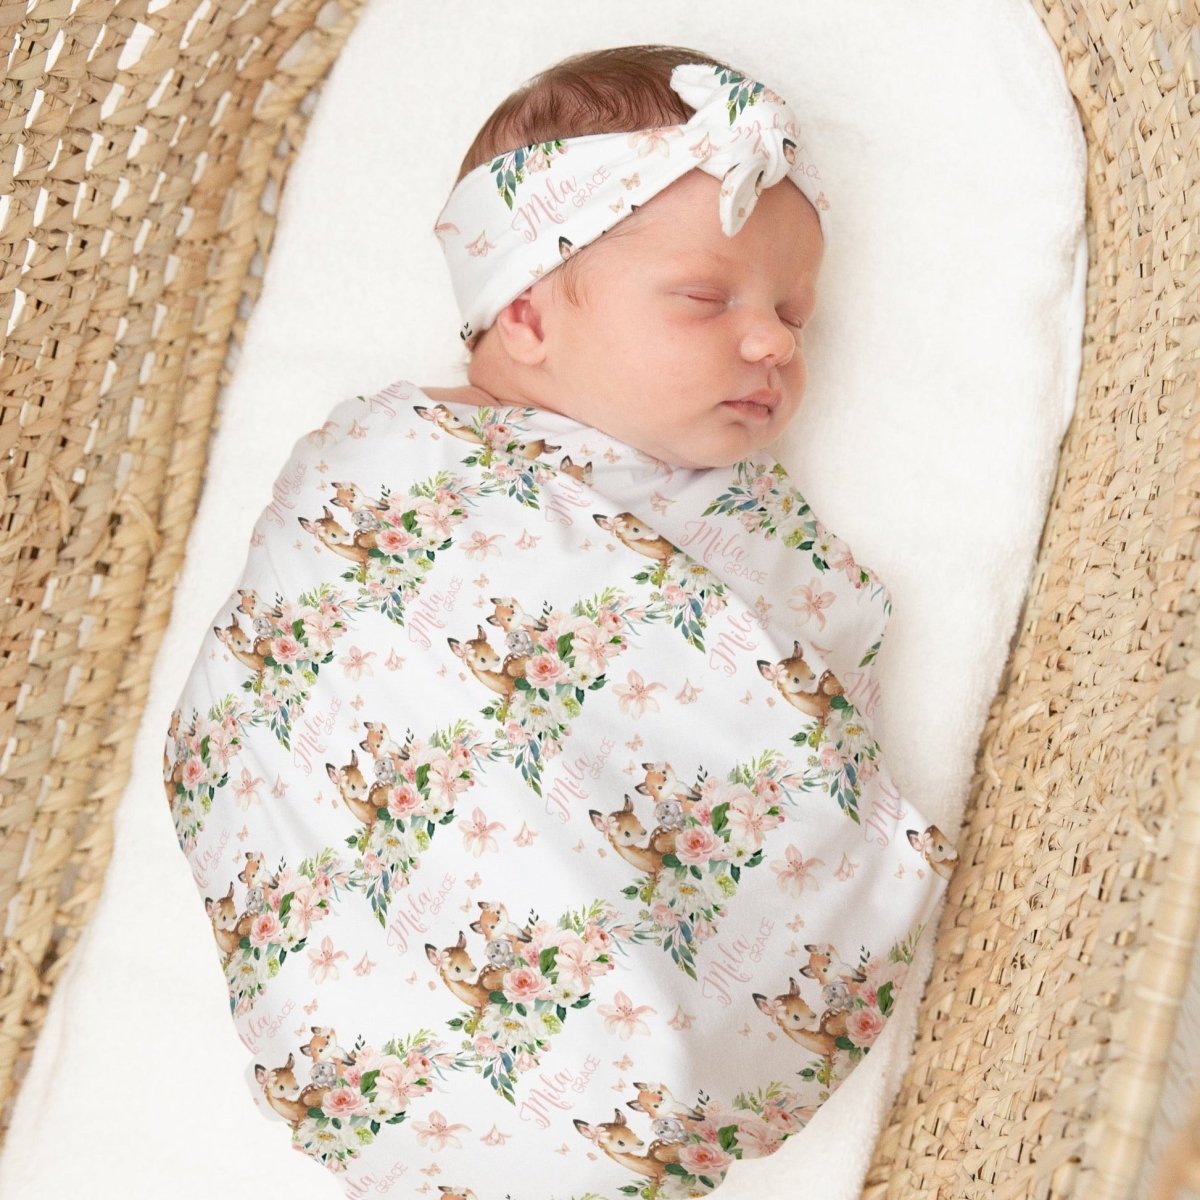 Woodland Meadows Personalized Swaddle Blanket Set - gender_girl, text, Theme_Floral